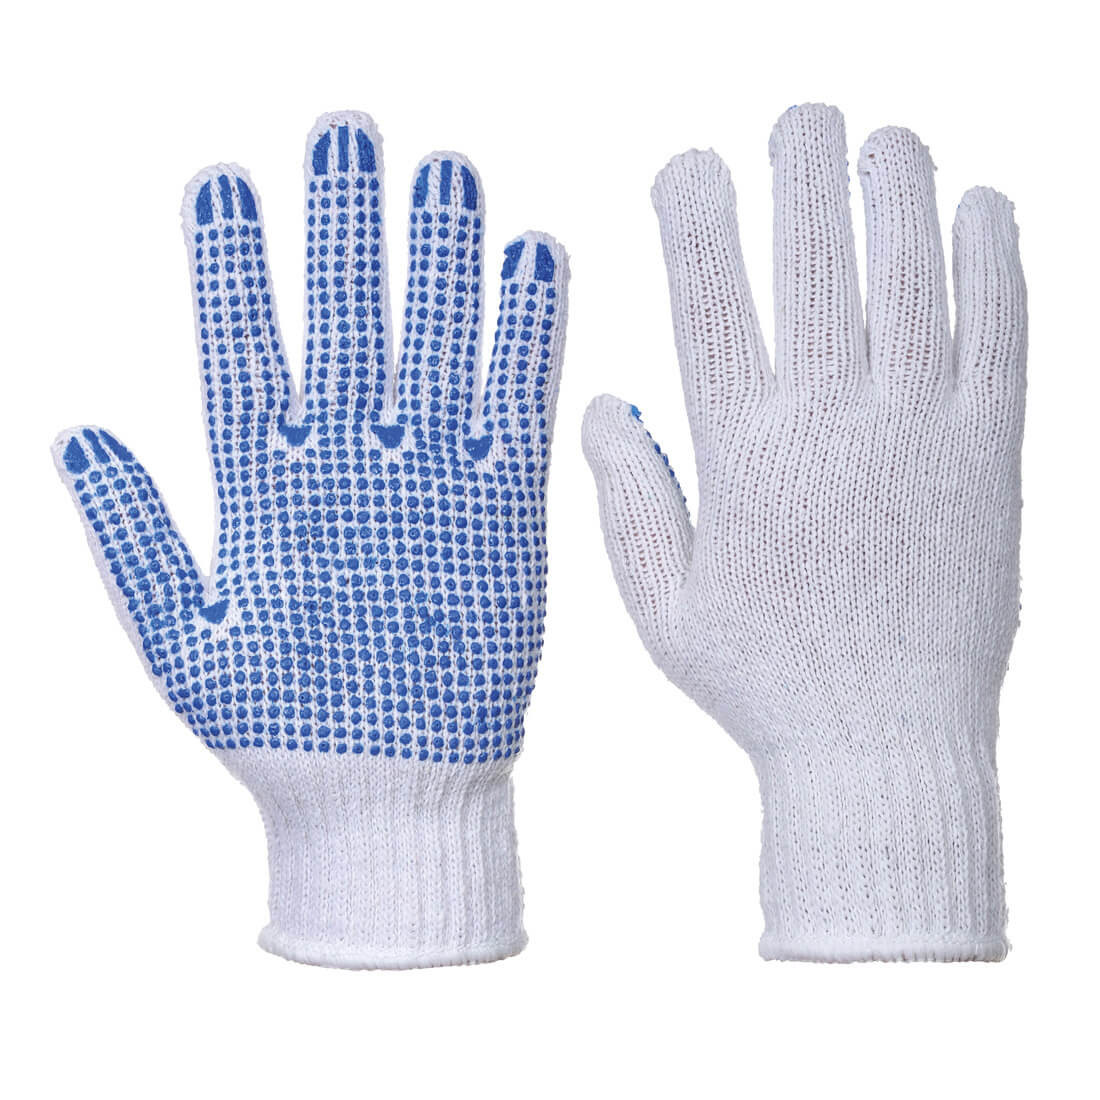 Classic Polka Dot Glove - Personal protection